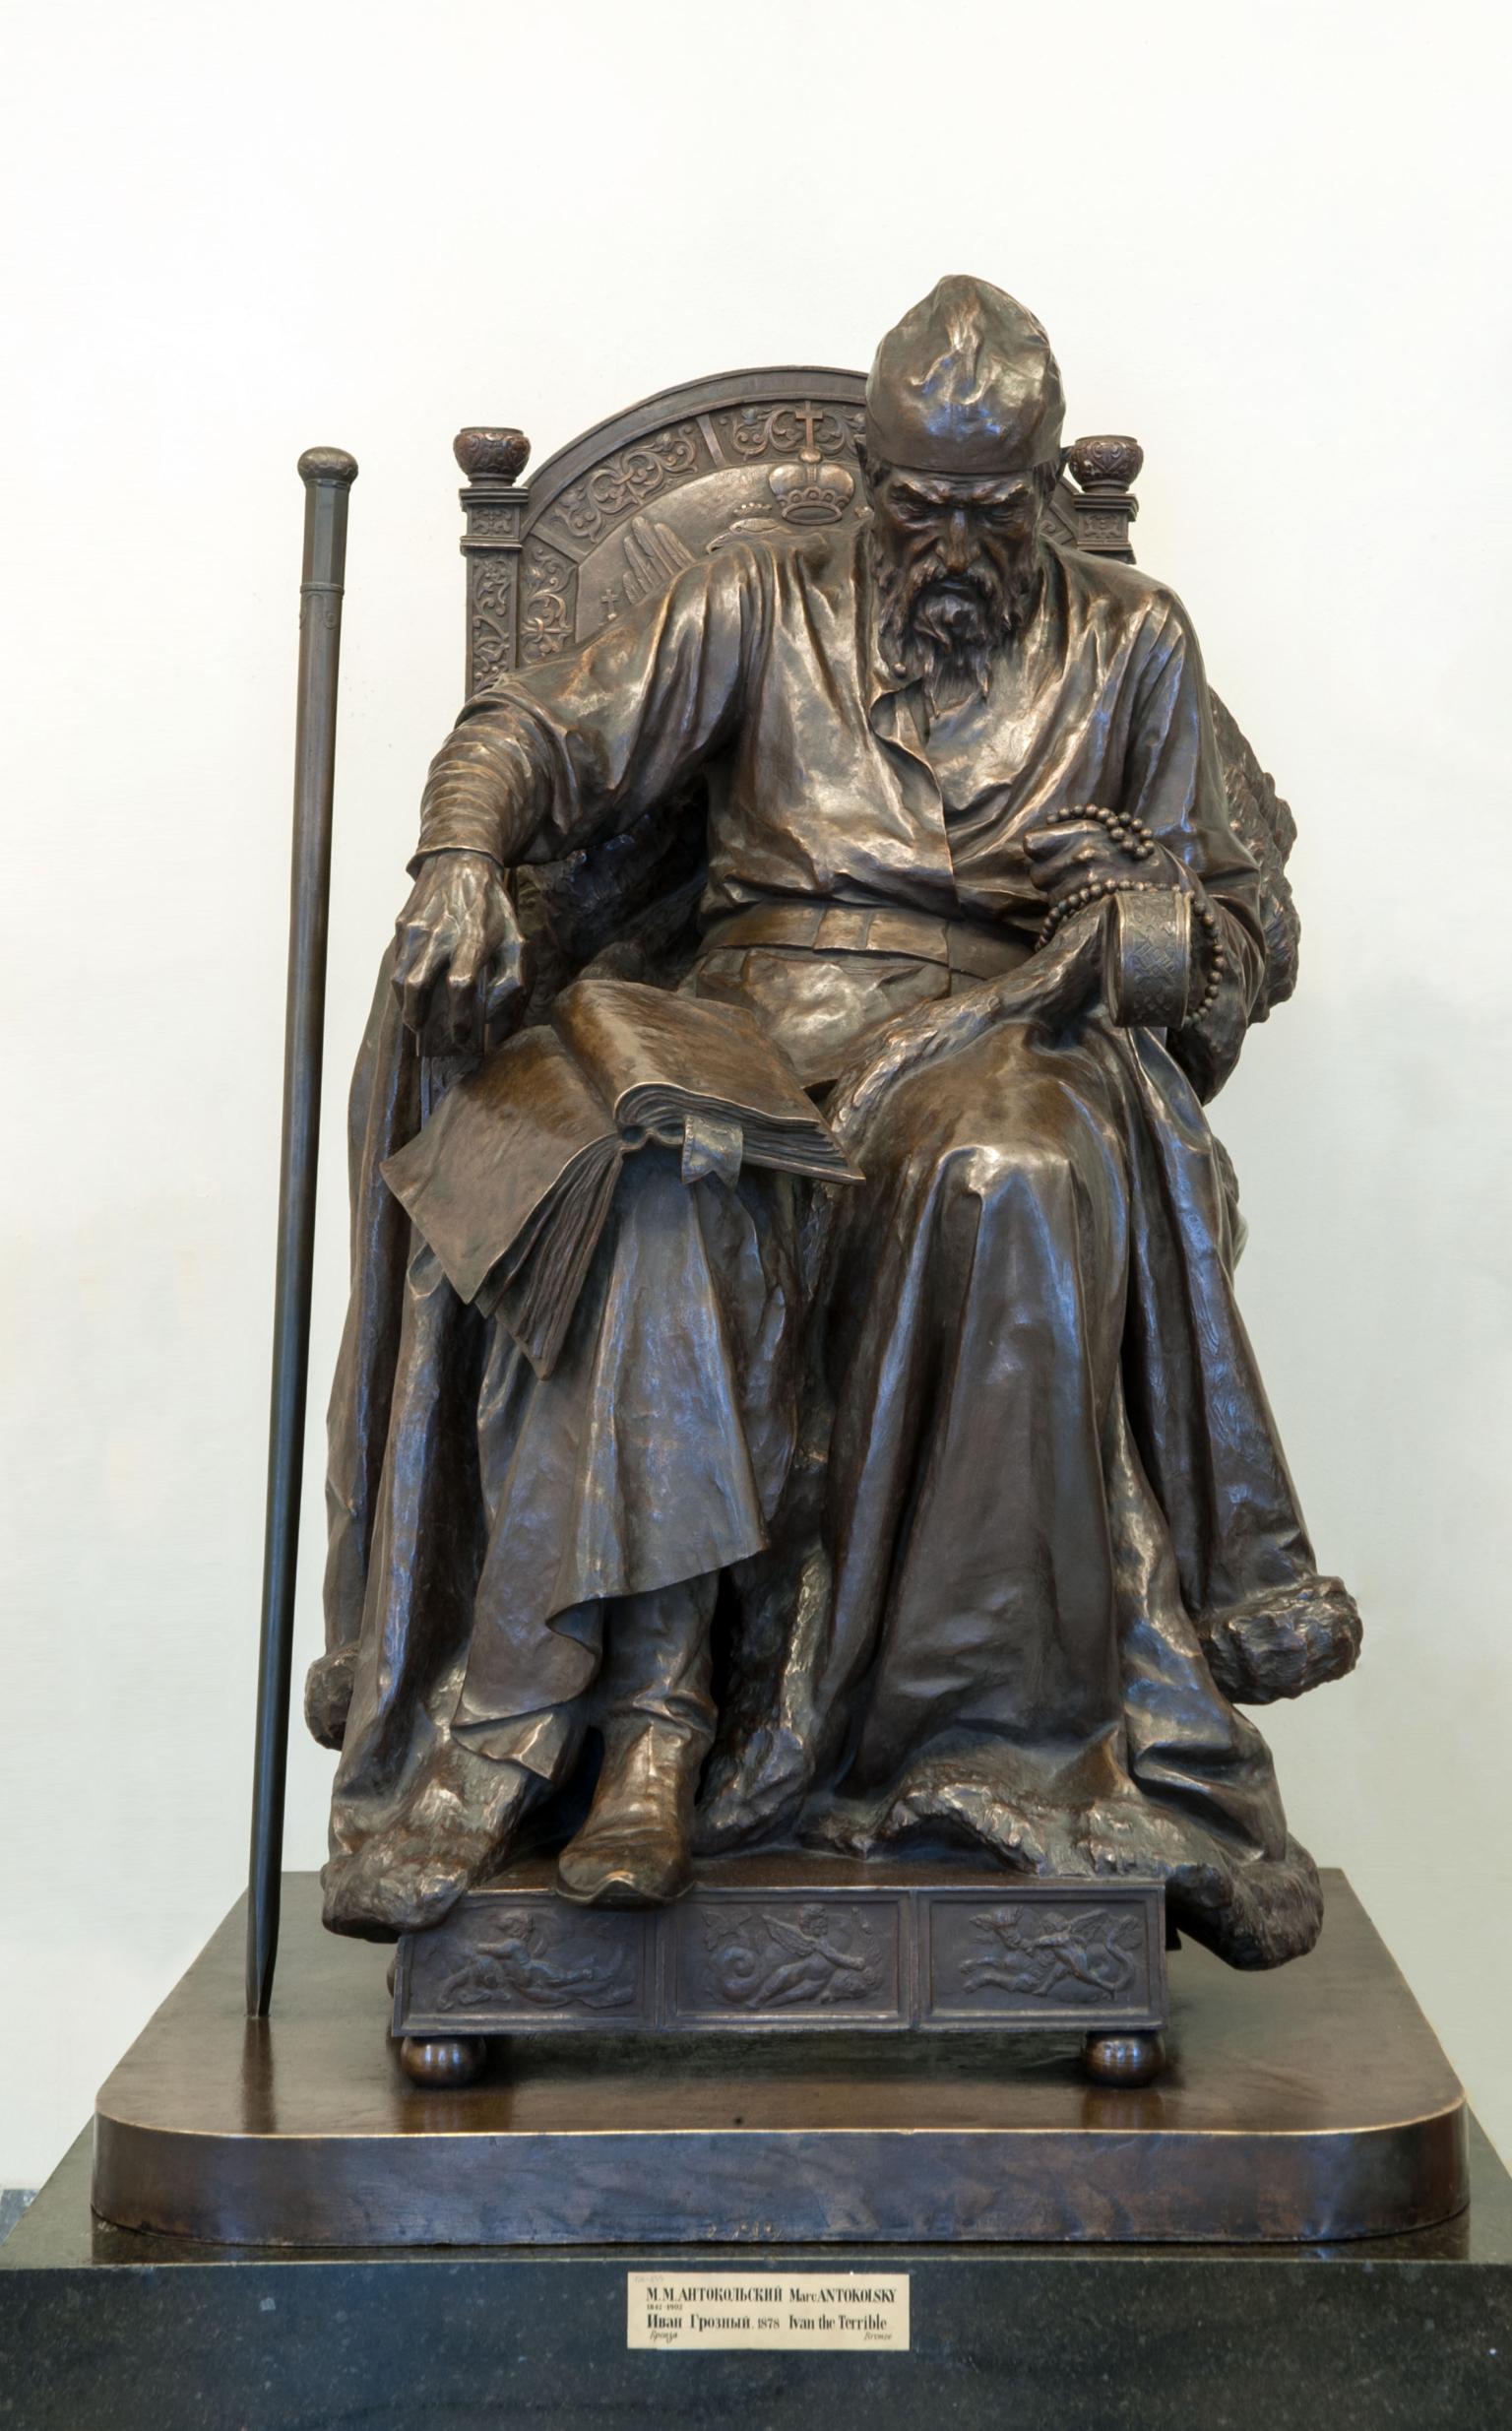 A sculpture of man with book and beads seated on throne.